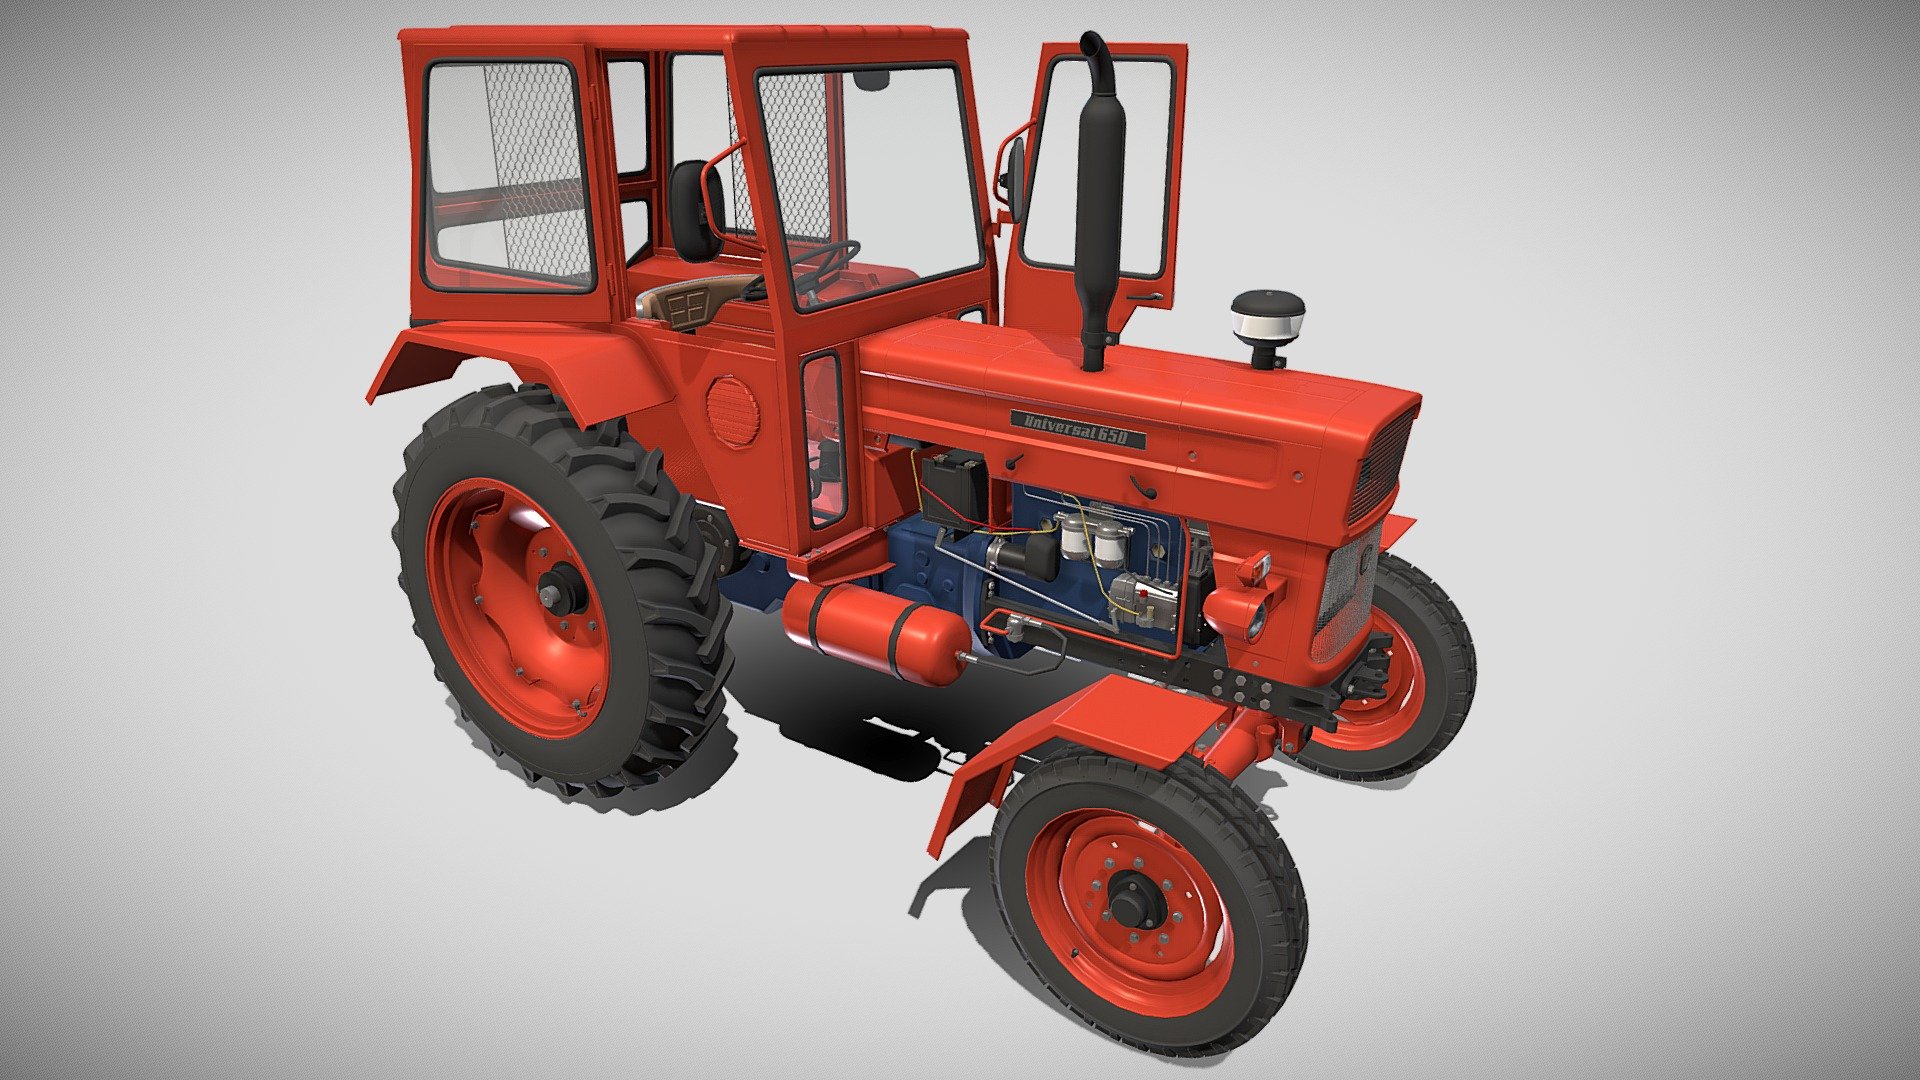 Highly detailed Tractor 3d model rendered with Cycles in Blender, as per seen on attached images.

The model is very intricately built, it has the transmission and engine, with cooling for oil and water, injection pump, fuel lines, compressed air circuit, electric circuit modeled. Some of these elements cannot be seen on the main renders, so I have also rendered the chassis in order to showcase them.

The 3d model is scaled to original size in Blender.

File formats:

-.blend, rendered with cycles, as seen in the images;

-.blend, rendered with cycles, as seen in the images, with doors open;

-.obj, with materials applied;

-.obj, with materials applied, with doors open;

-.dae, with materials applied;

-.dae, with materials applied, with doors open;

-.fbx, with materials applied;

-.fbx, with materials applied, with doors open;

-.stl;

-.stl, with doors open;

Files come named appropriately and split by file format.

3D Software:

The 3D model was originally created in Blender 2.8 and rendered with Cycles 3d model